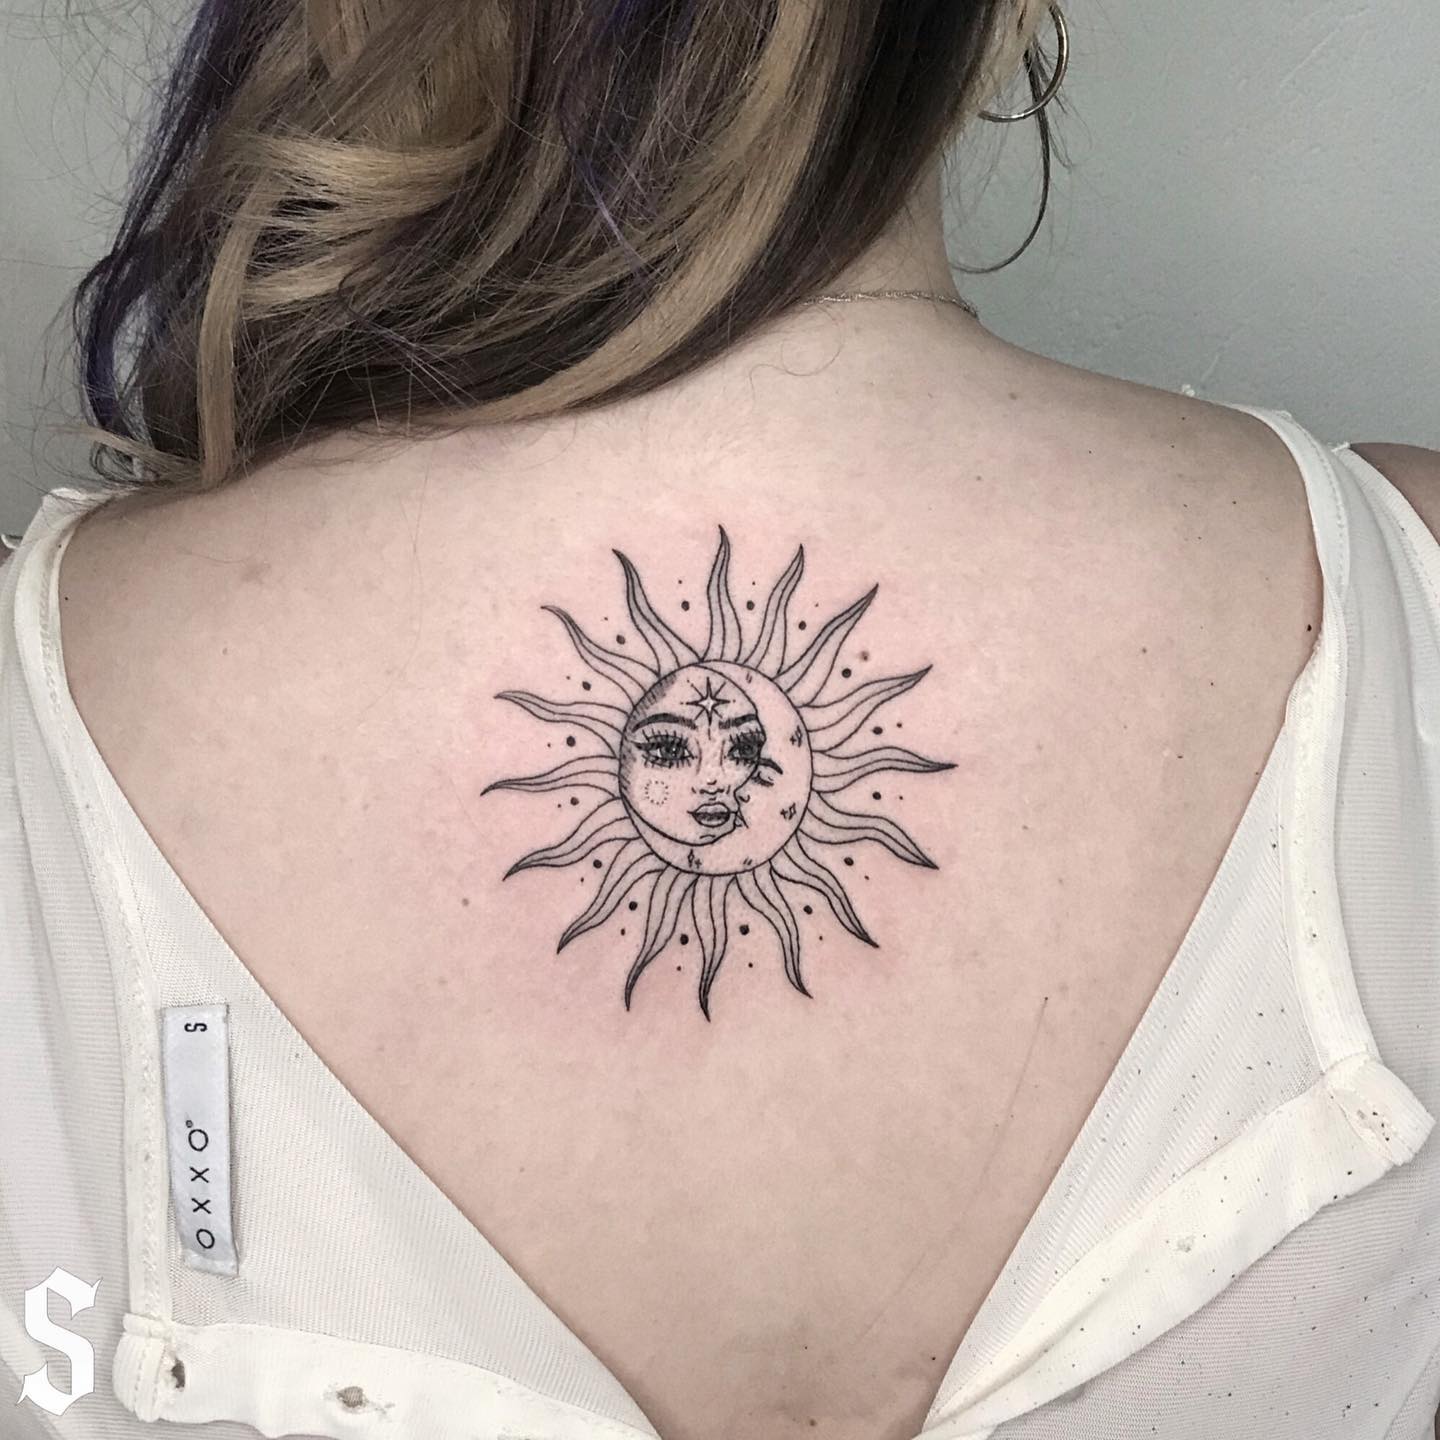 Sun and moon tattoo on the upper back.